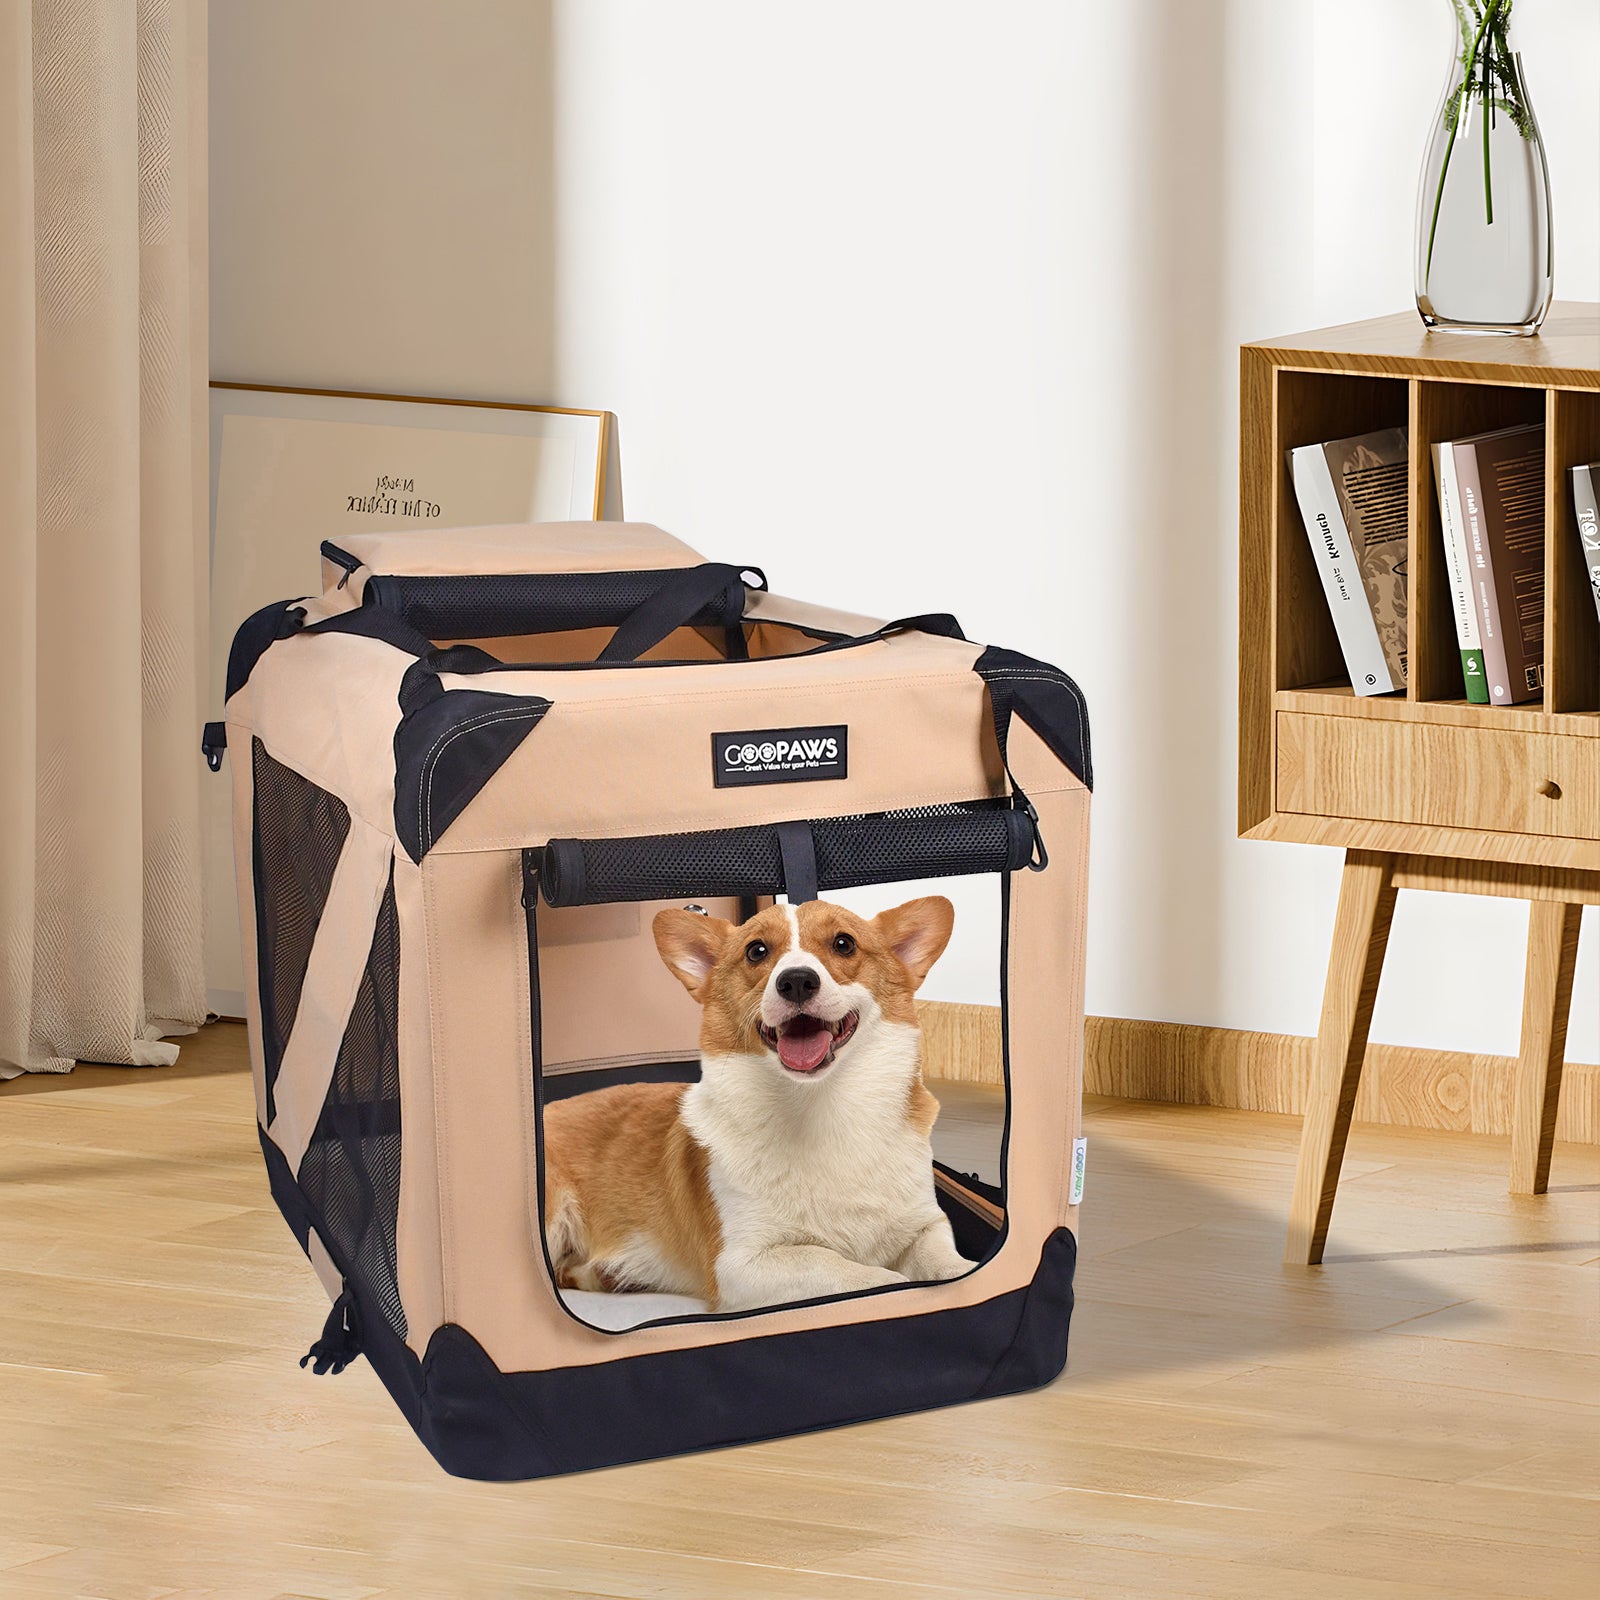 Jespet Folding Soft-Sided Dog Crate with mat - Bed Bath & Beyond - 32589954